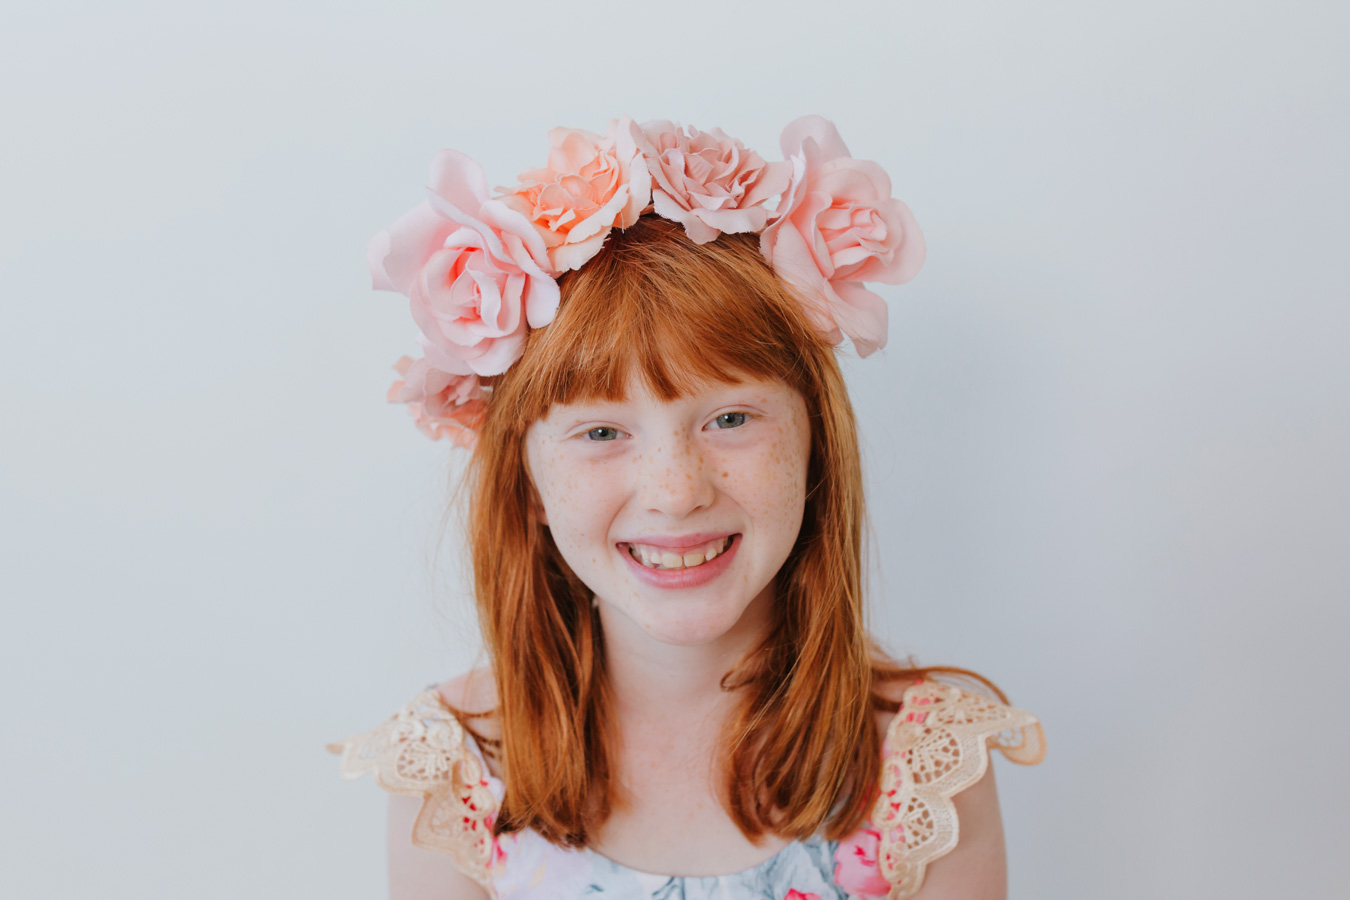 family photography session in studio. Little girl in flower crown